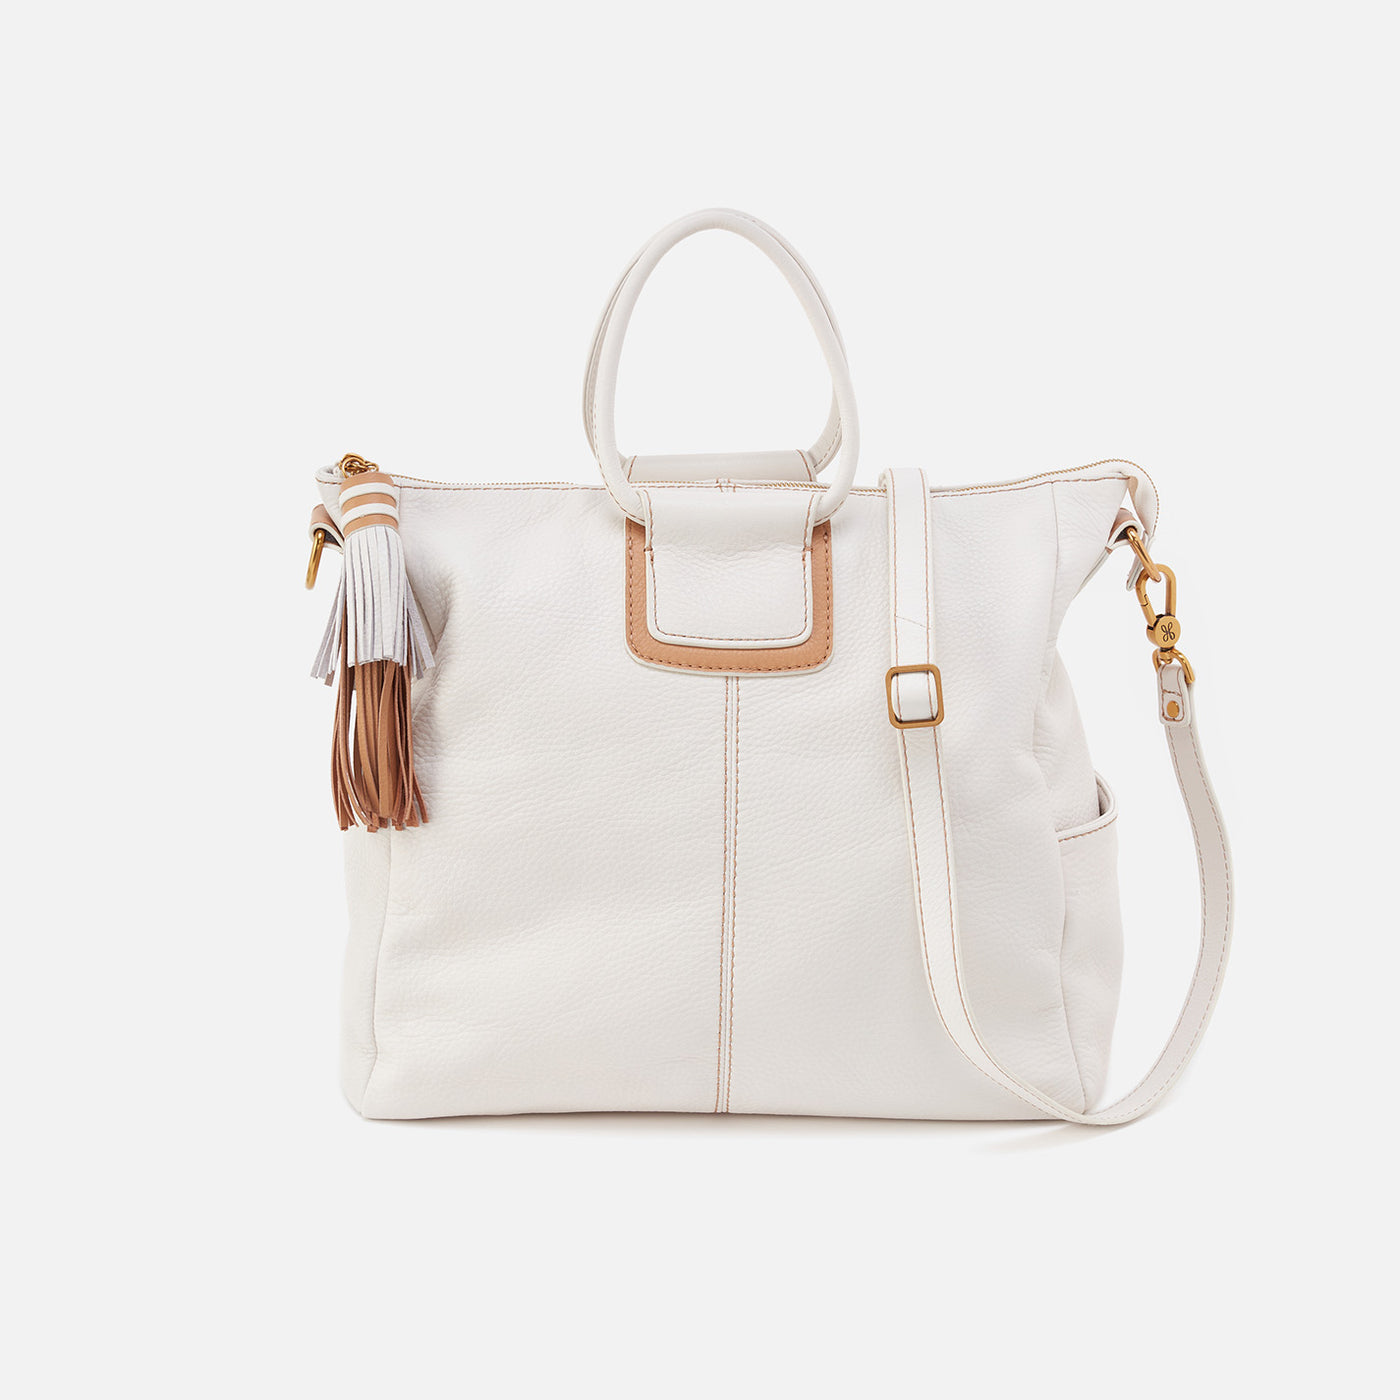 Sheila Large Satchel in Pebbled Leather - White